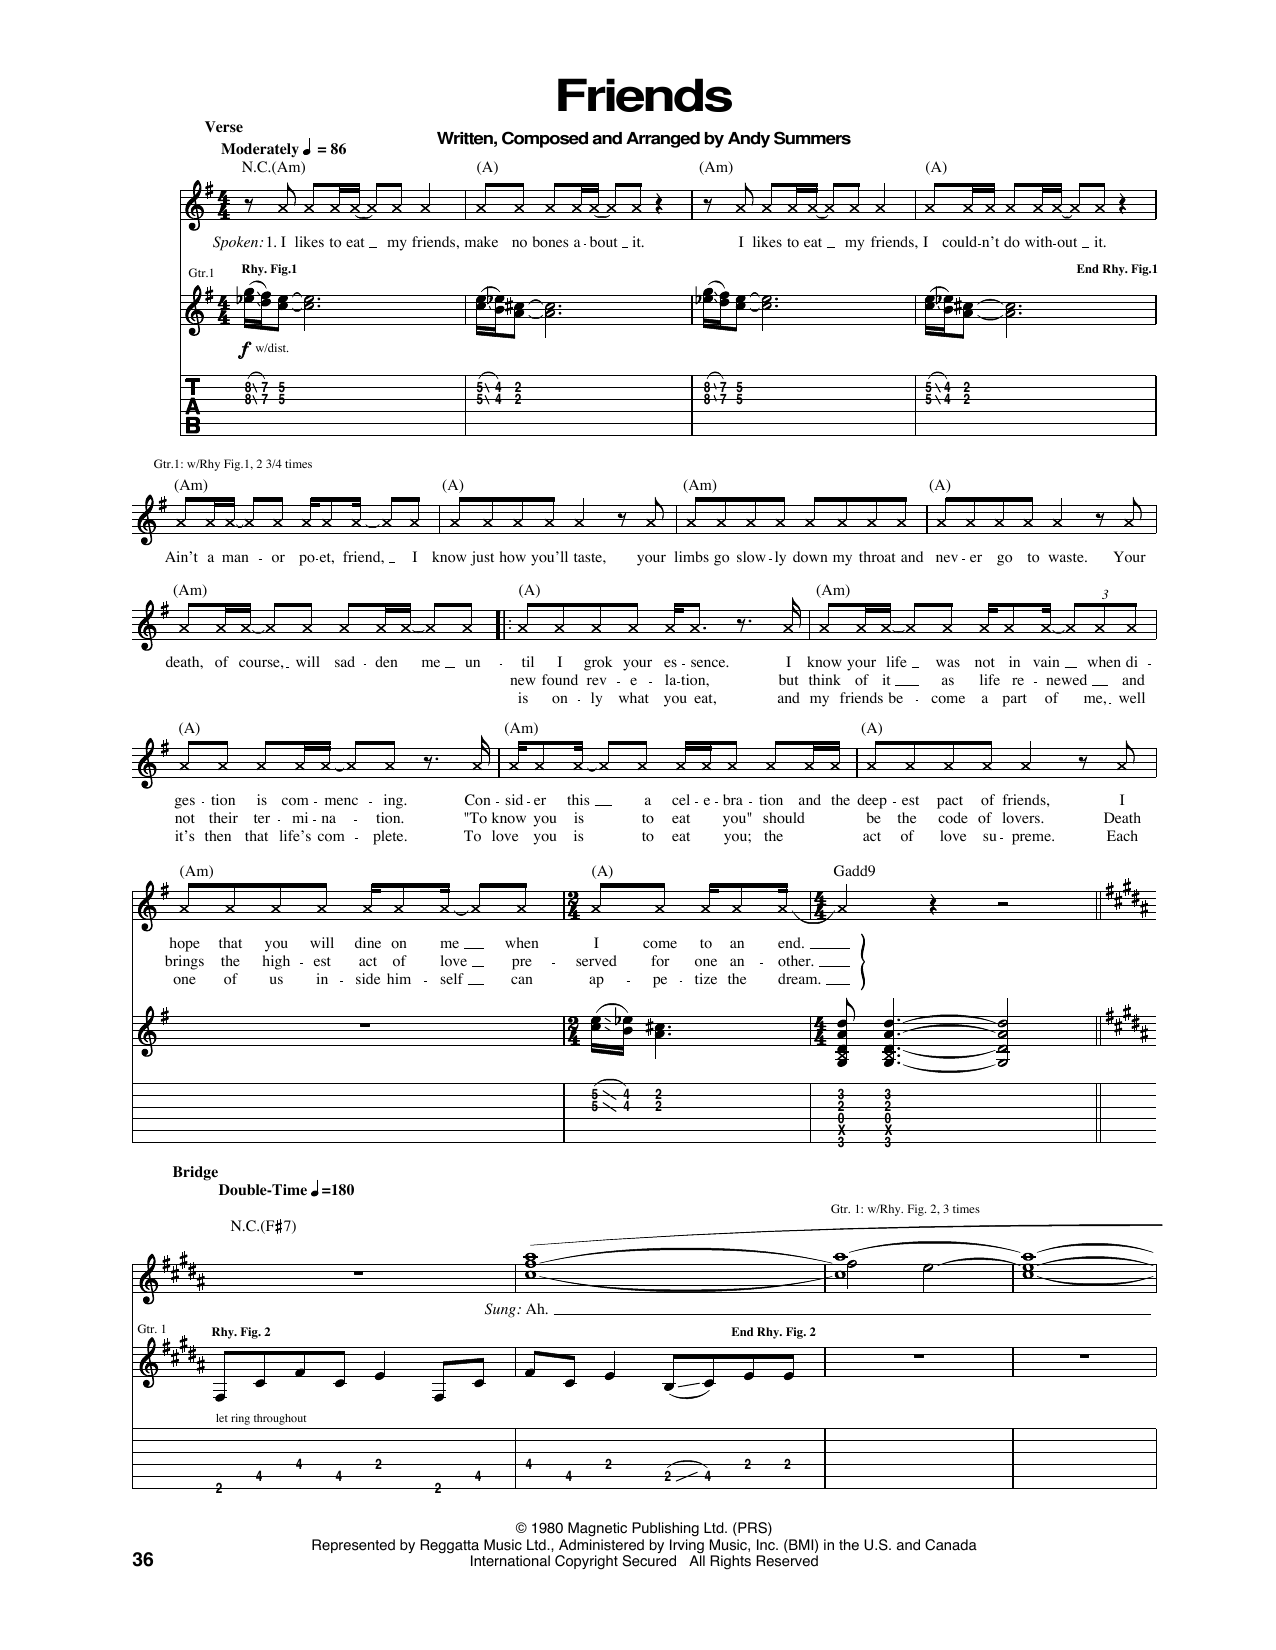 Download The Police Friends Sheet Music